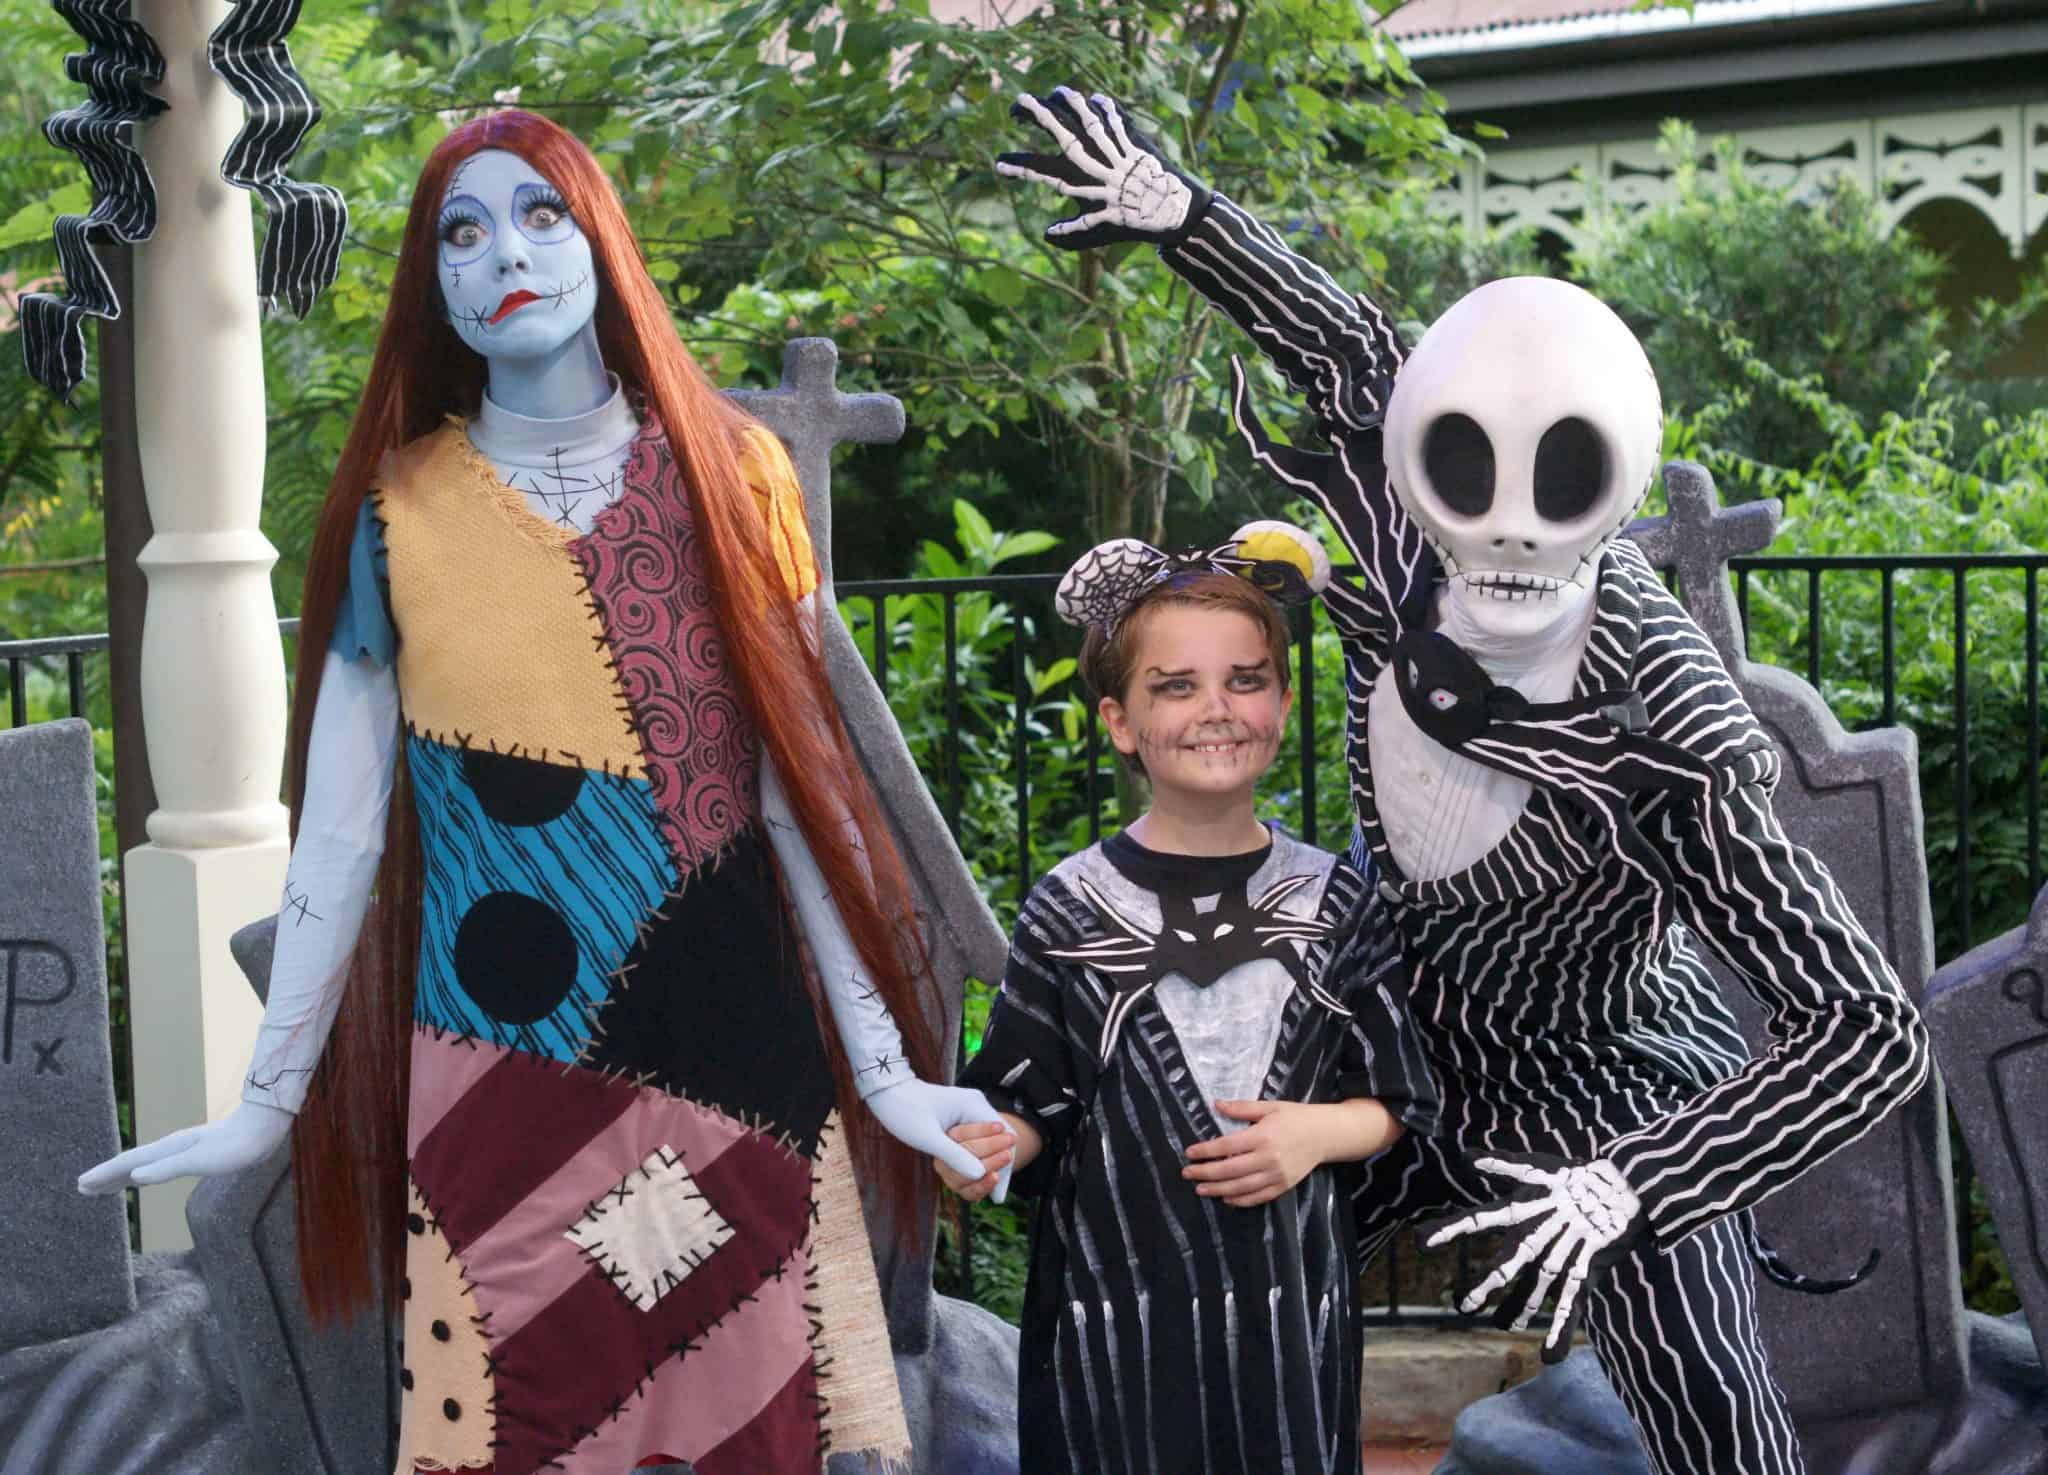 Tips for Mickey's Not So Scary Halloween Party Are you planning a Not So Scary family costume? Don't miss these great tips to make the most of your costume while avoiding some common mistakes.